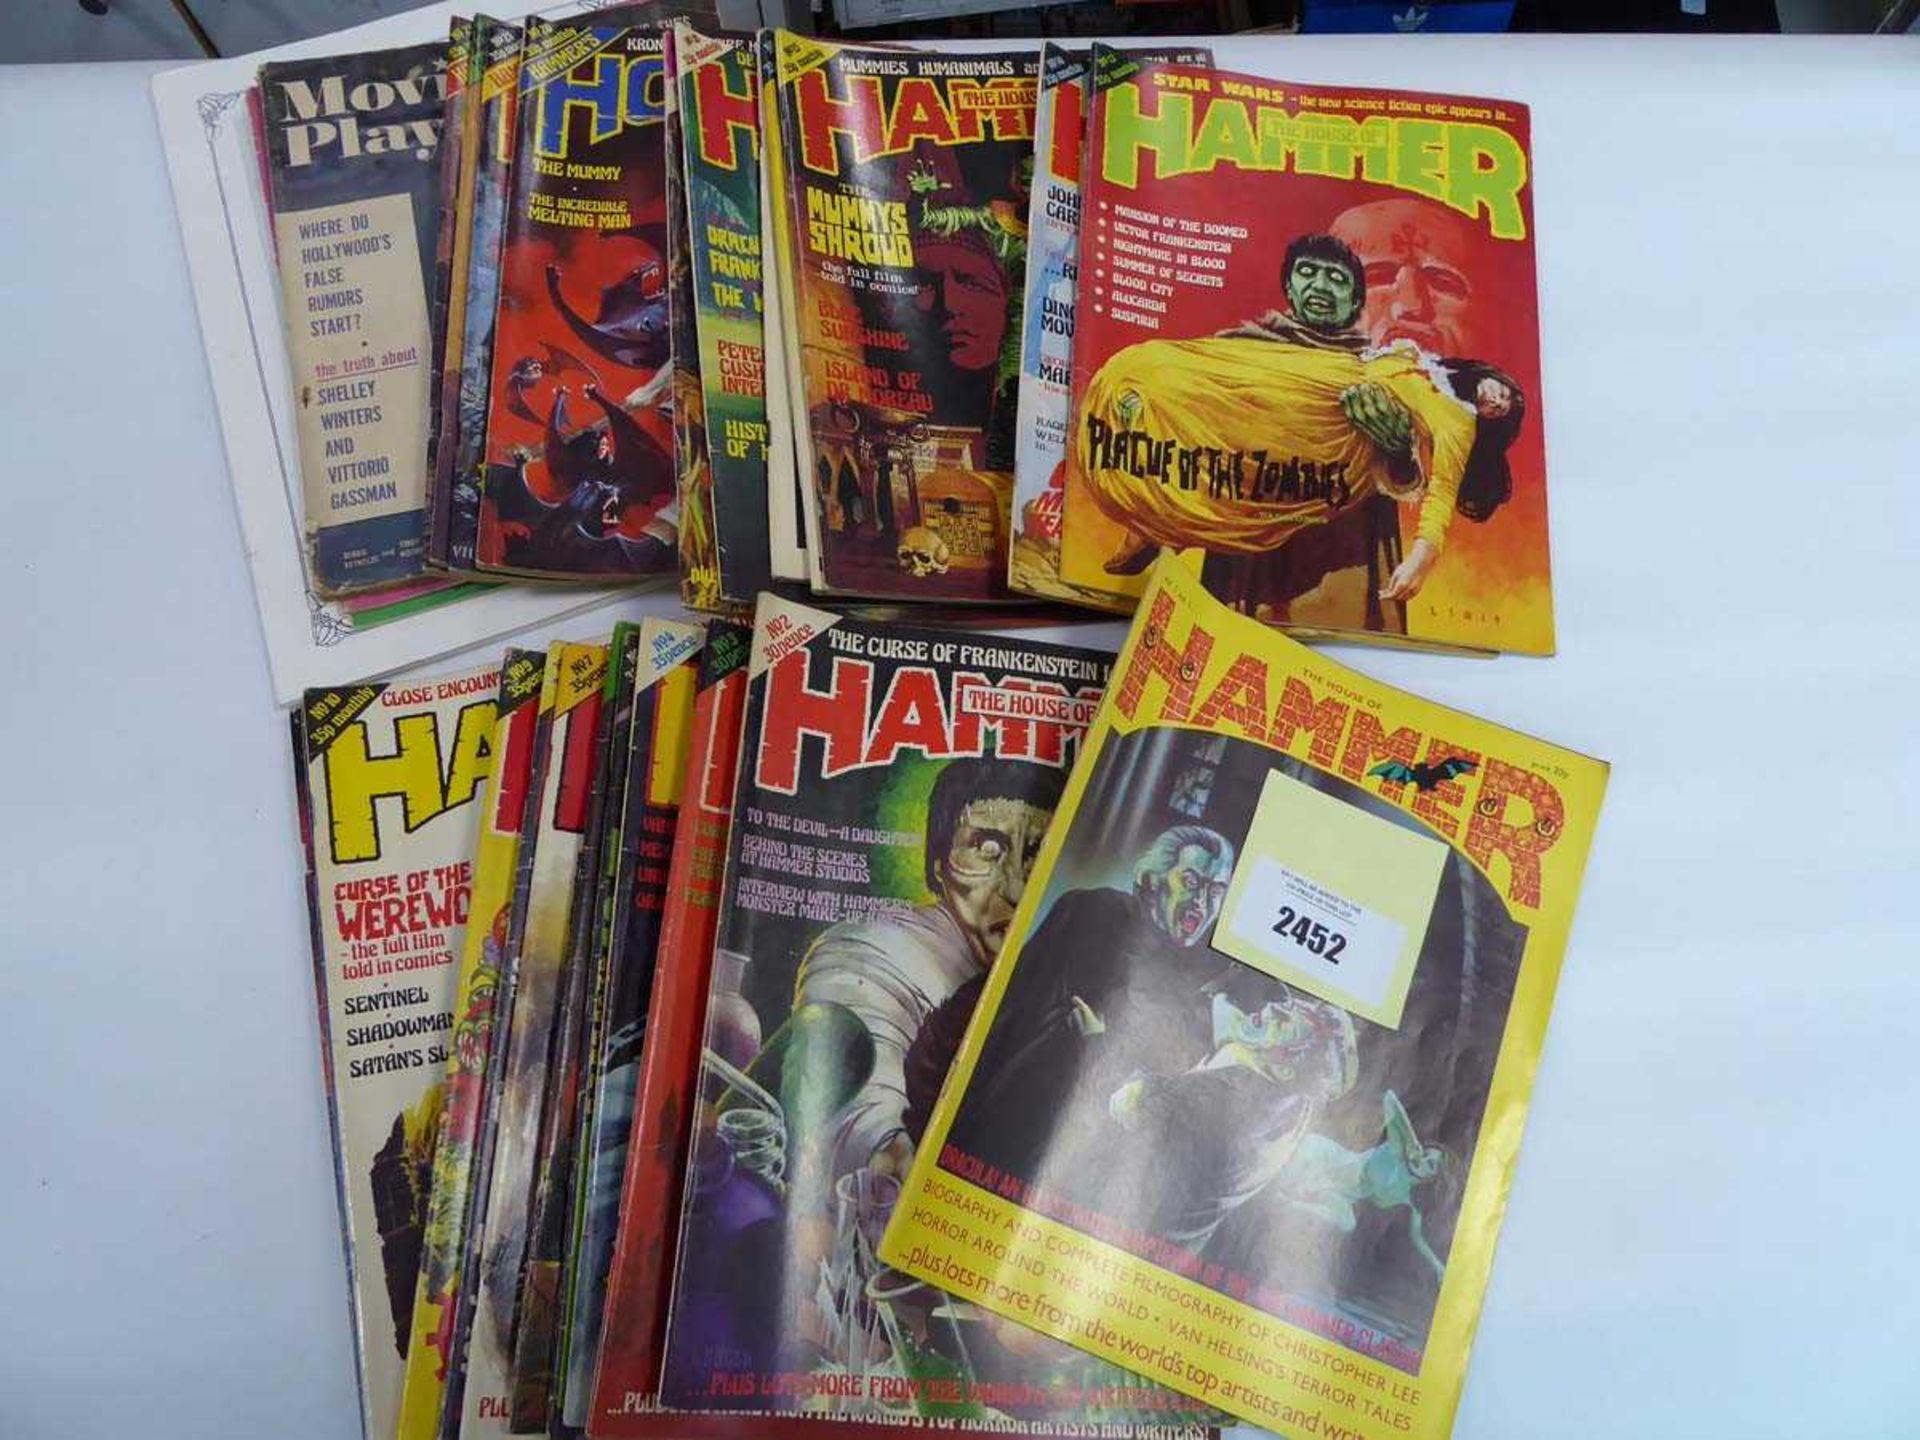 Collection of the House of Hammer comics